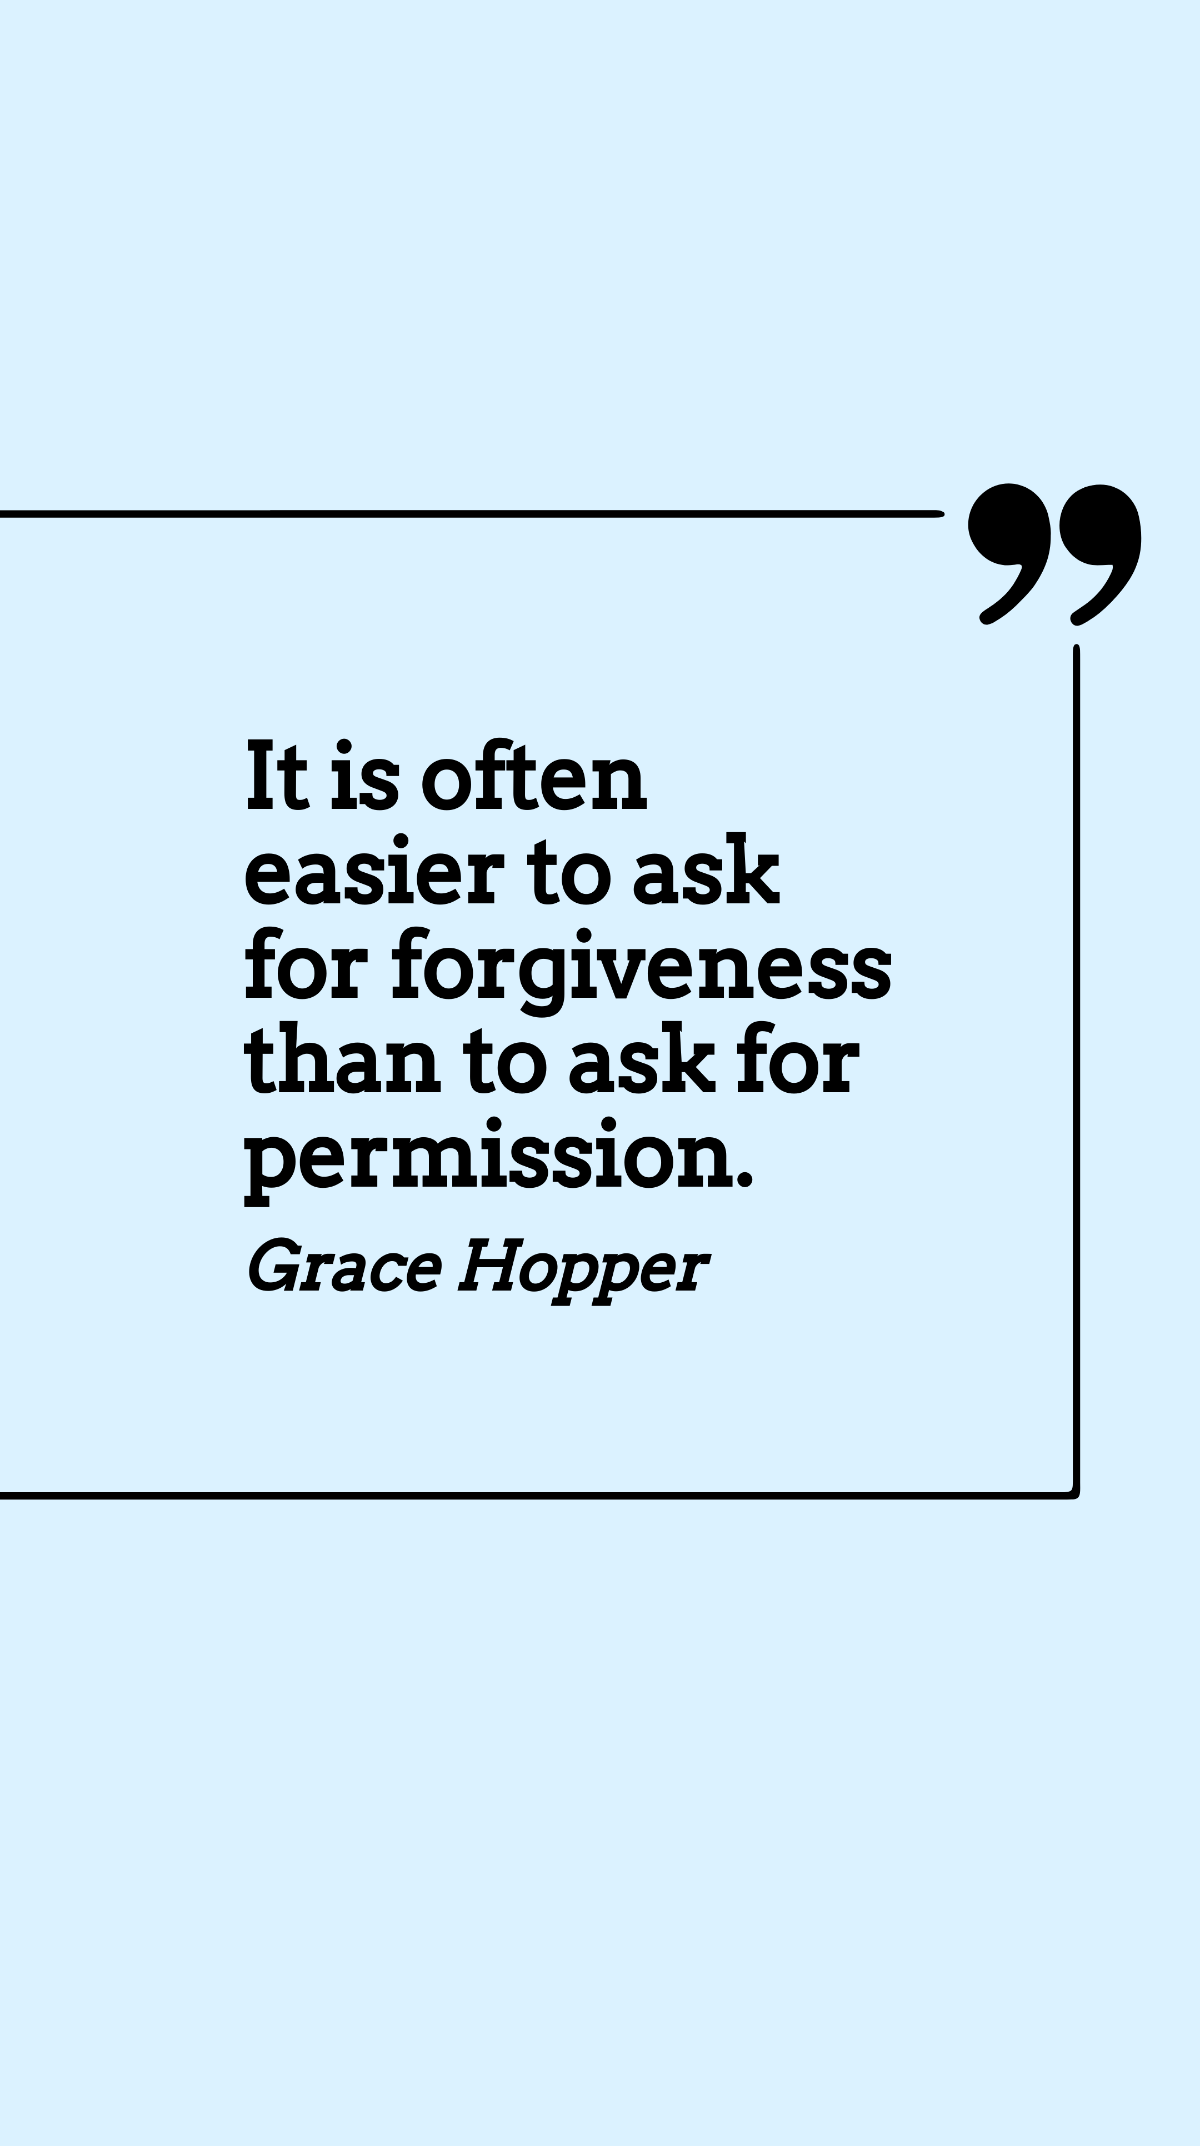 Grace Hopper - It is often easier to ask for forgiveness than to ask for permission.